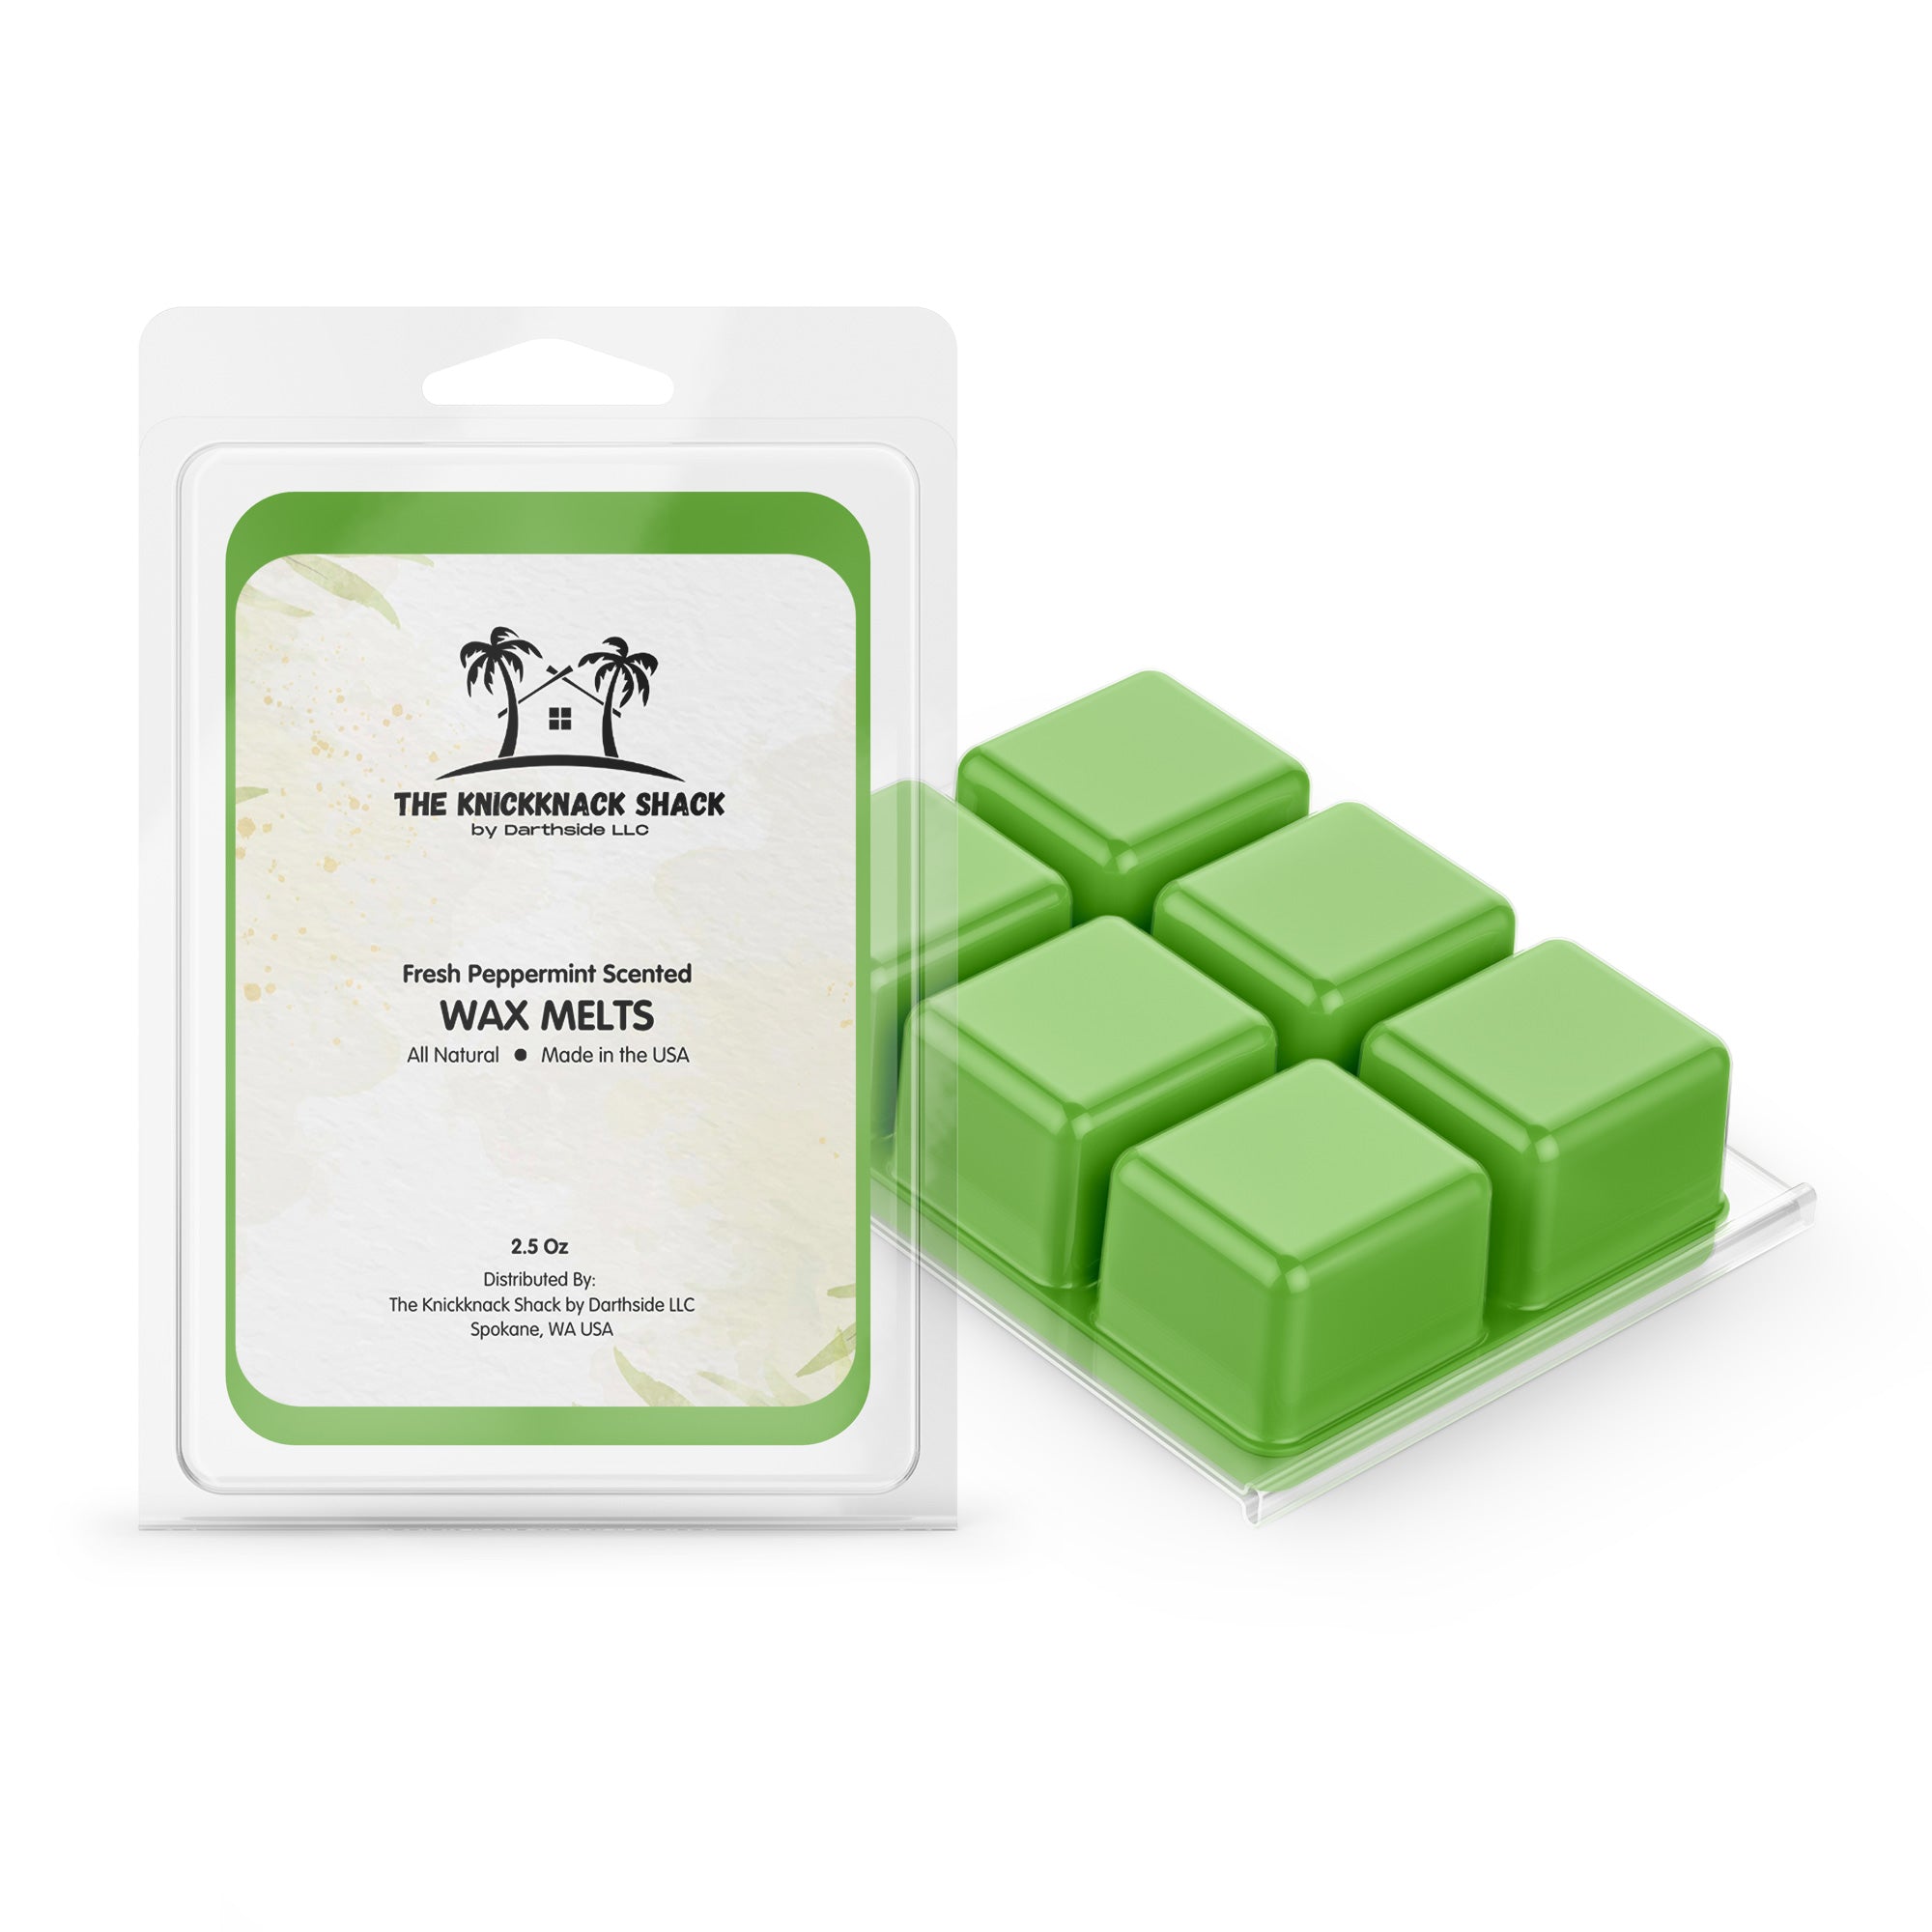 Fresh Peppermint Scented Wax Melts